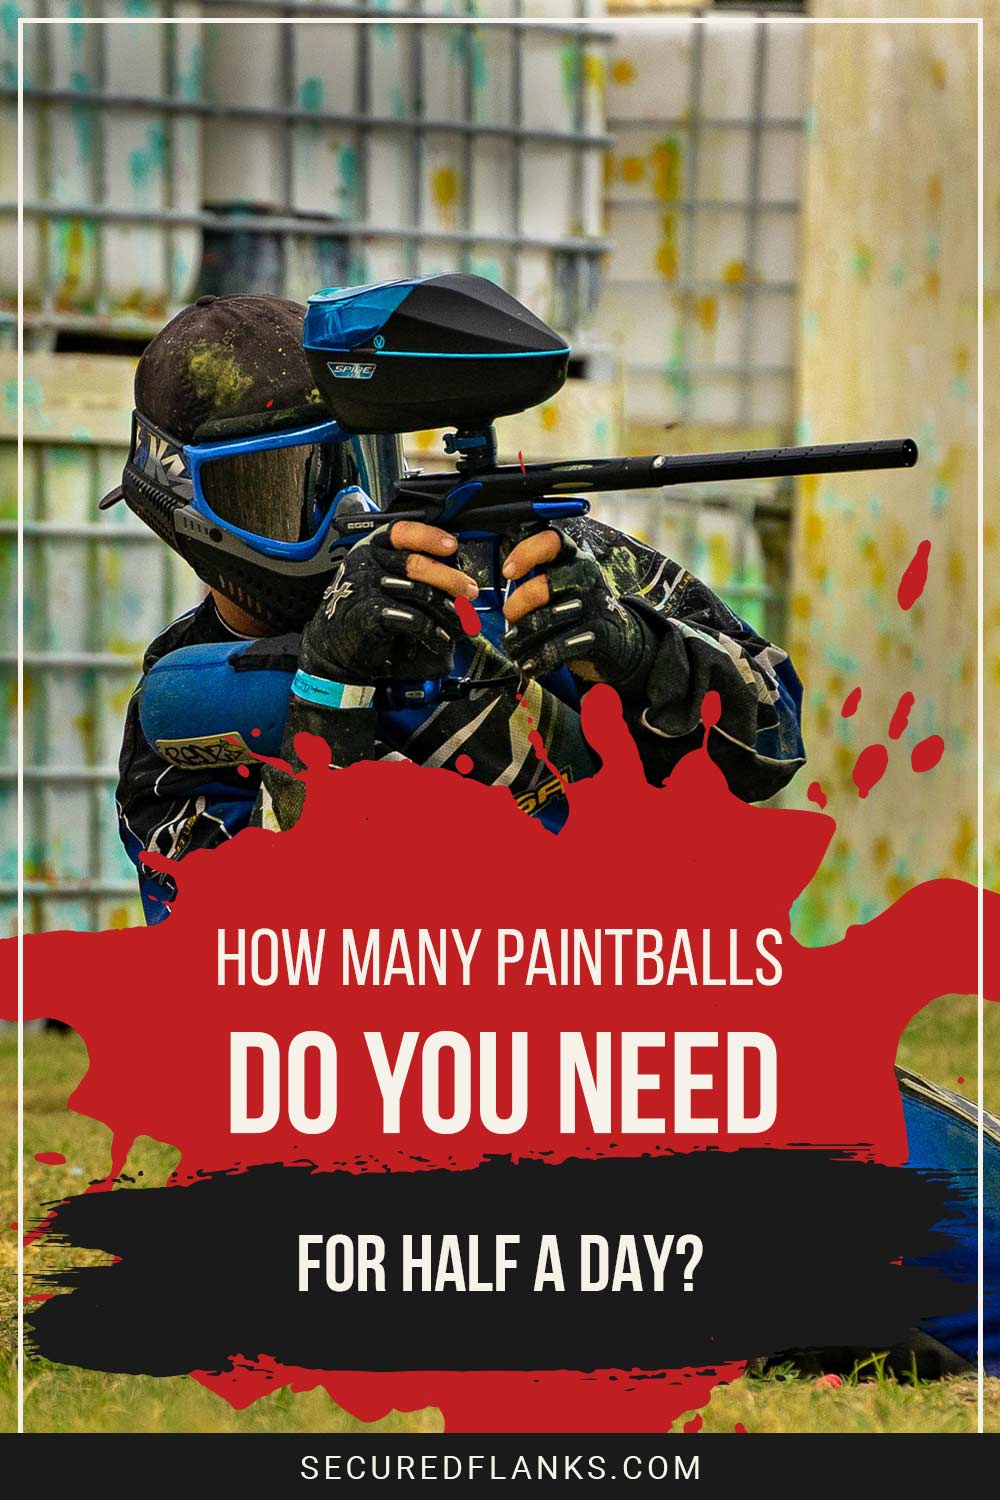 Person with a paintball gun aiming - How Many Paintballs Do You Need for Half a Day?